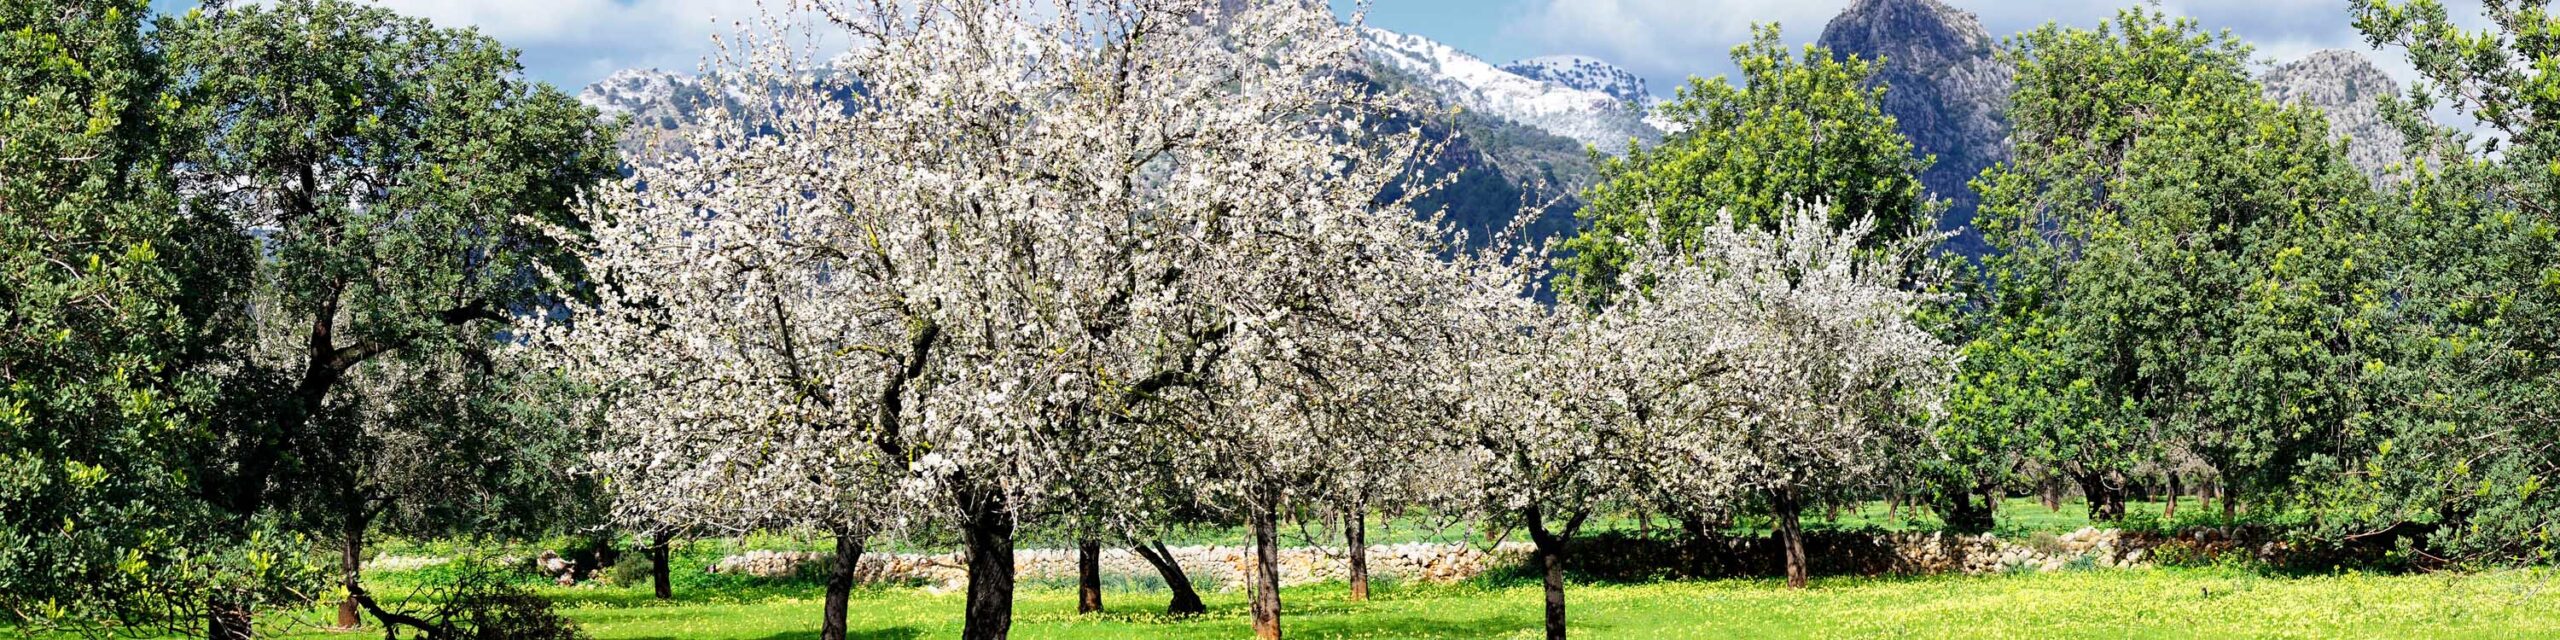 Almond trees in bloom in a grassy field with mountains in the background.